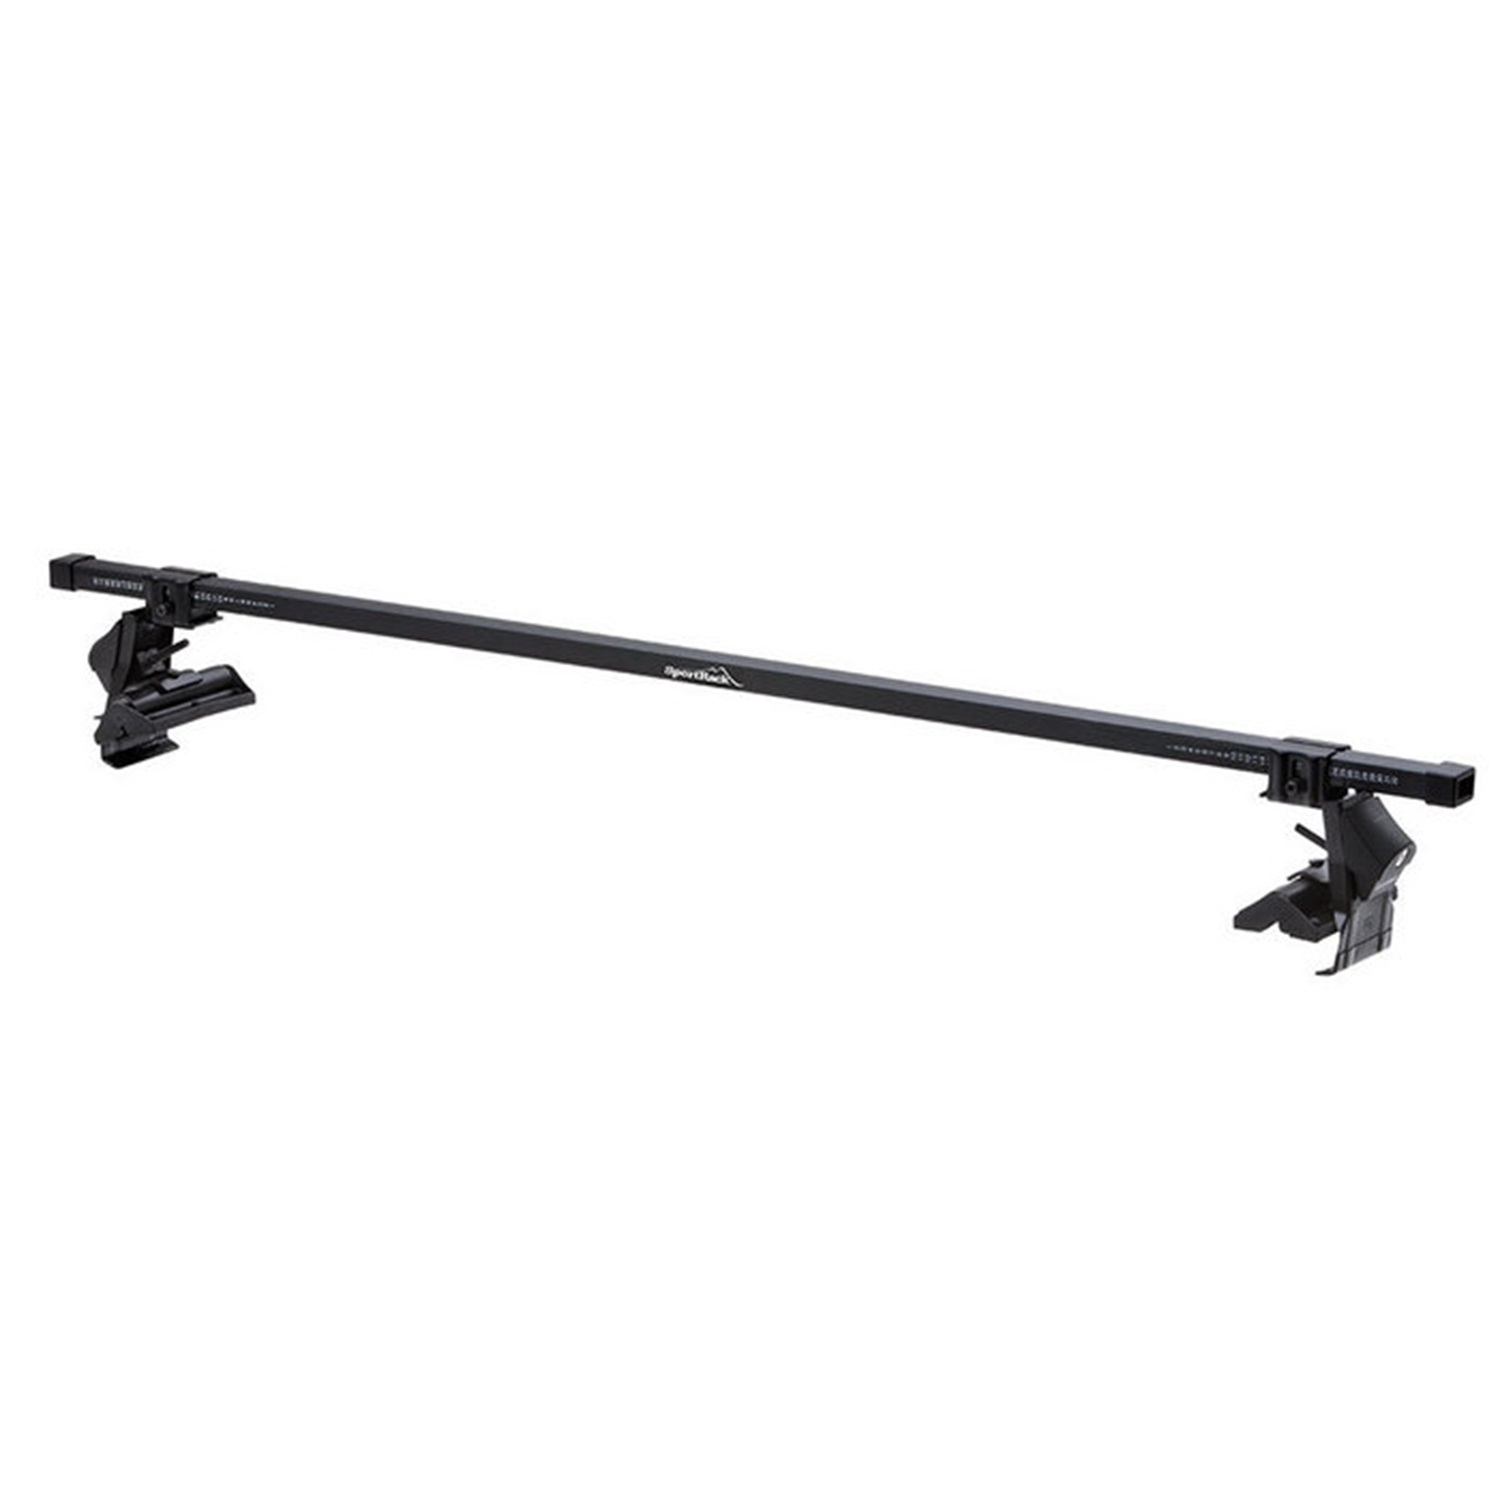 Thule Thule SR1002 SportRack Complete Roof Rack System Fits 99-03 S80